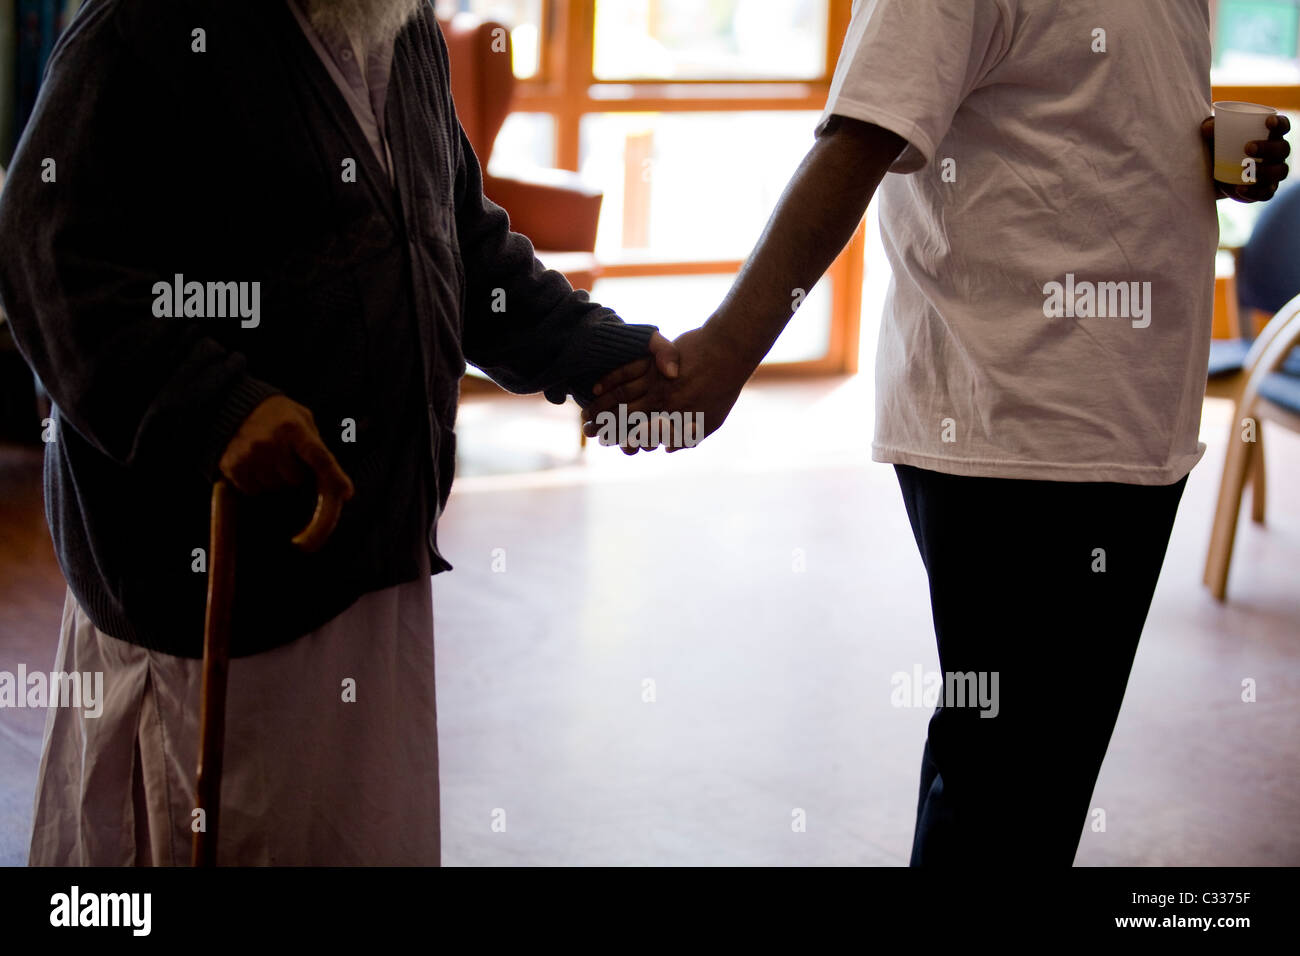 Old person with carer Stock Photo